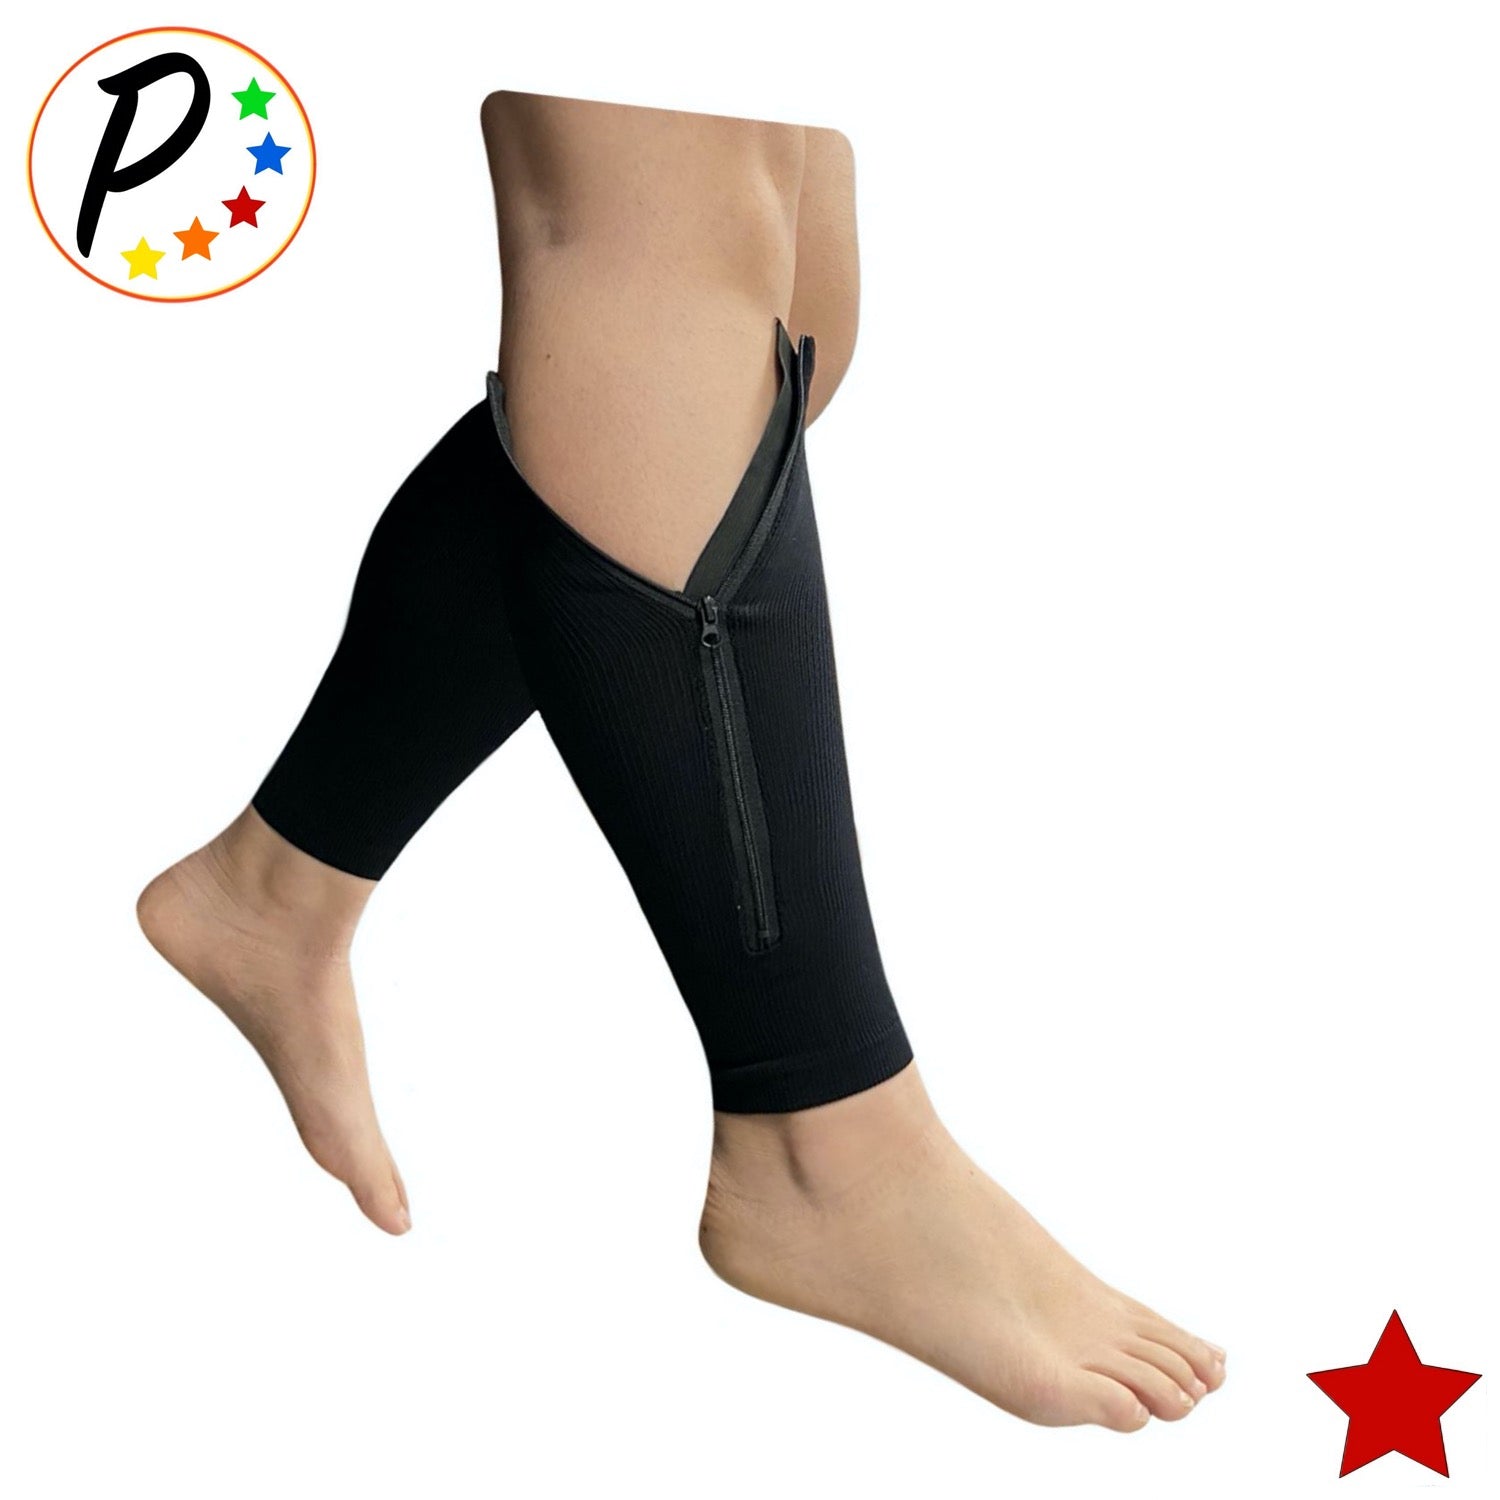 Compression Calf Sleeves BUY NOW - FREE Shipping